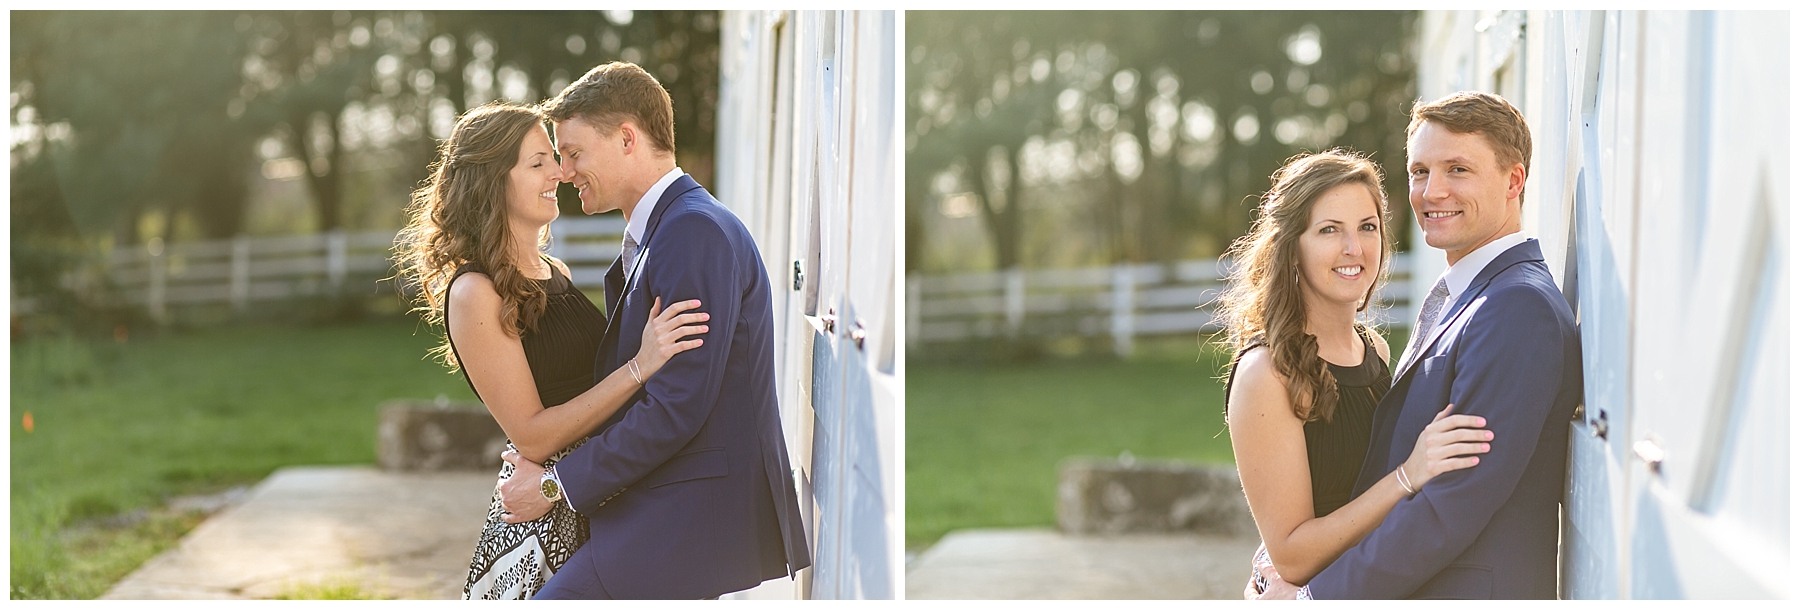 Chelsea Phil Private Estate Engagement Living Radiant Photography photos color_0016.jpg